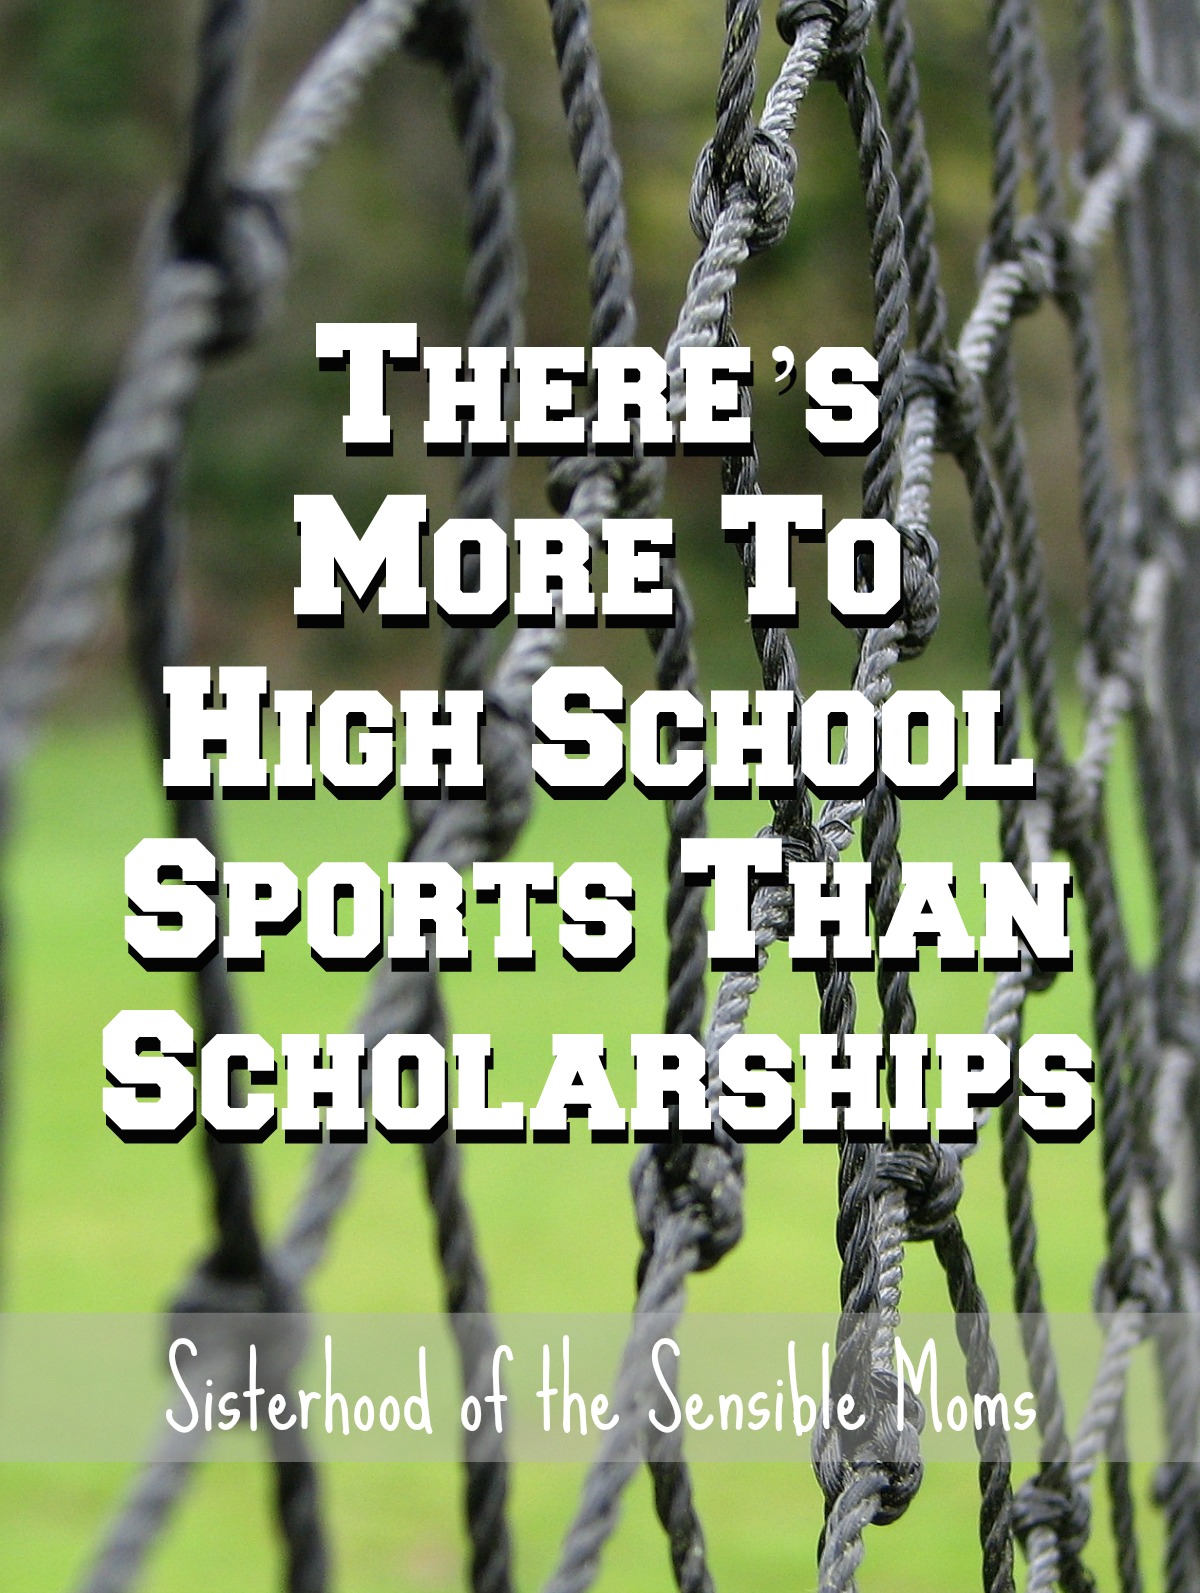 5 Reasons Why There's More to High School Sports Than Scholarships. Sure sports can be about the big college pay-off, but there's much more to universally value about high school sports than just scholarships. | Parenting Advice | Teens | Sisterhood of the Sensible Moms